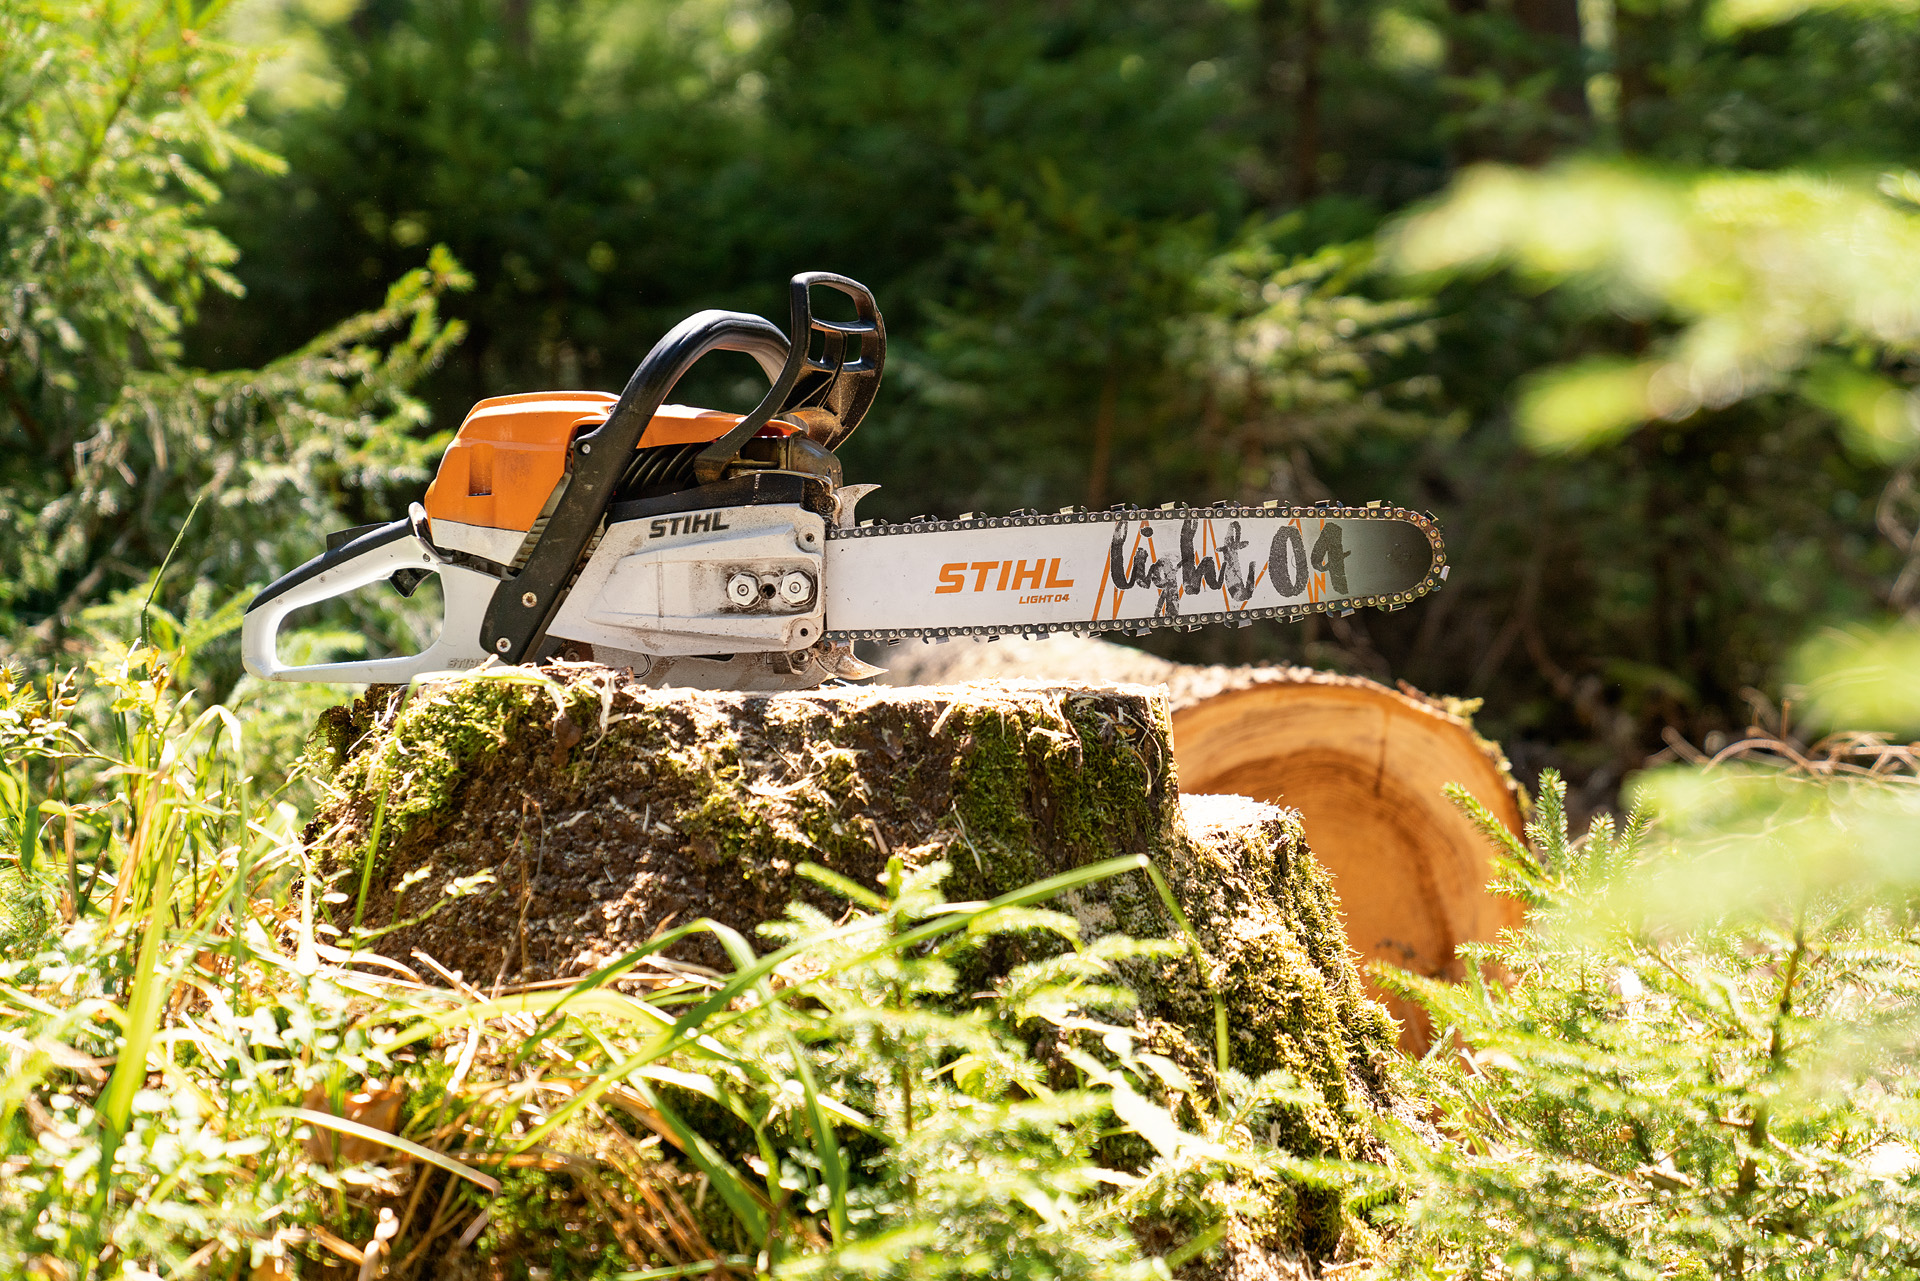 A STIHL MS 261 C-M petrol chainsaw on a tree stump surrounded by greenery